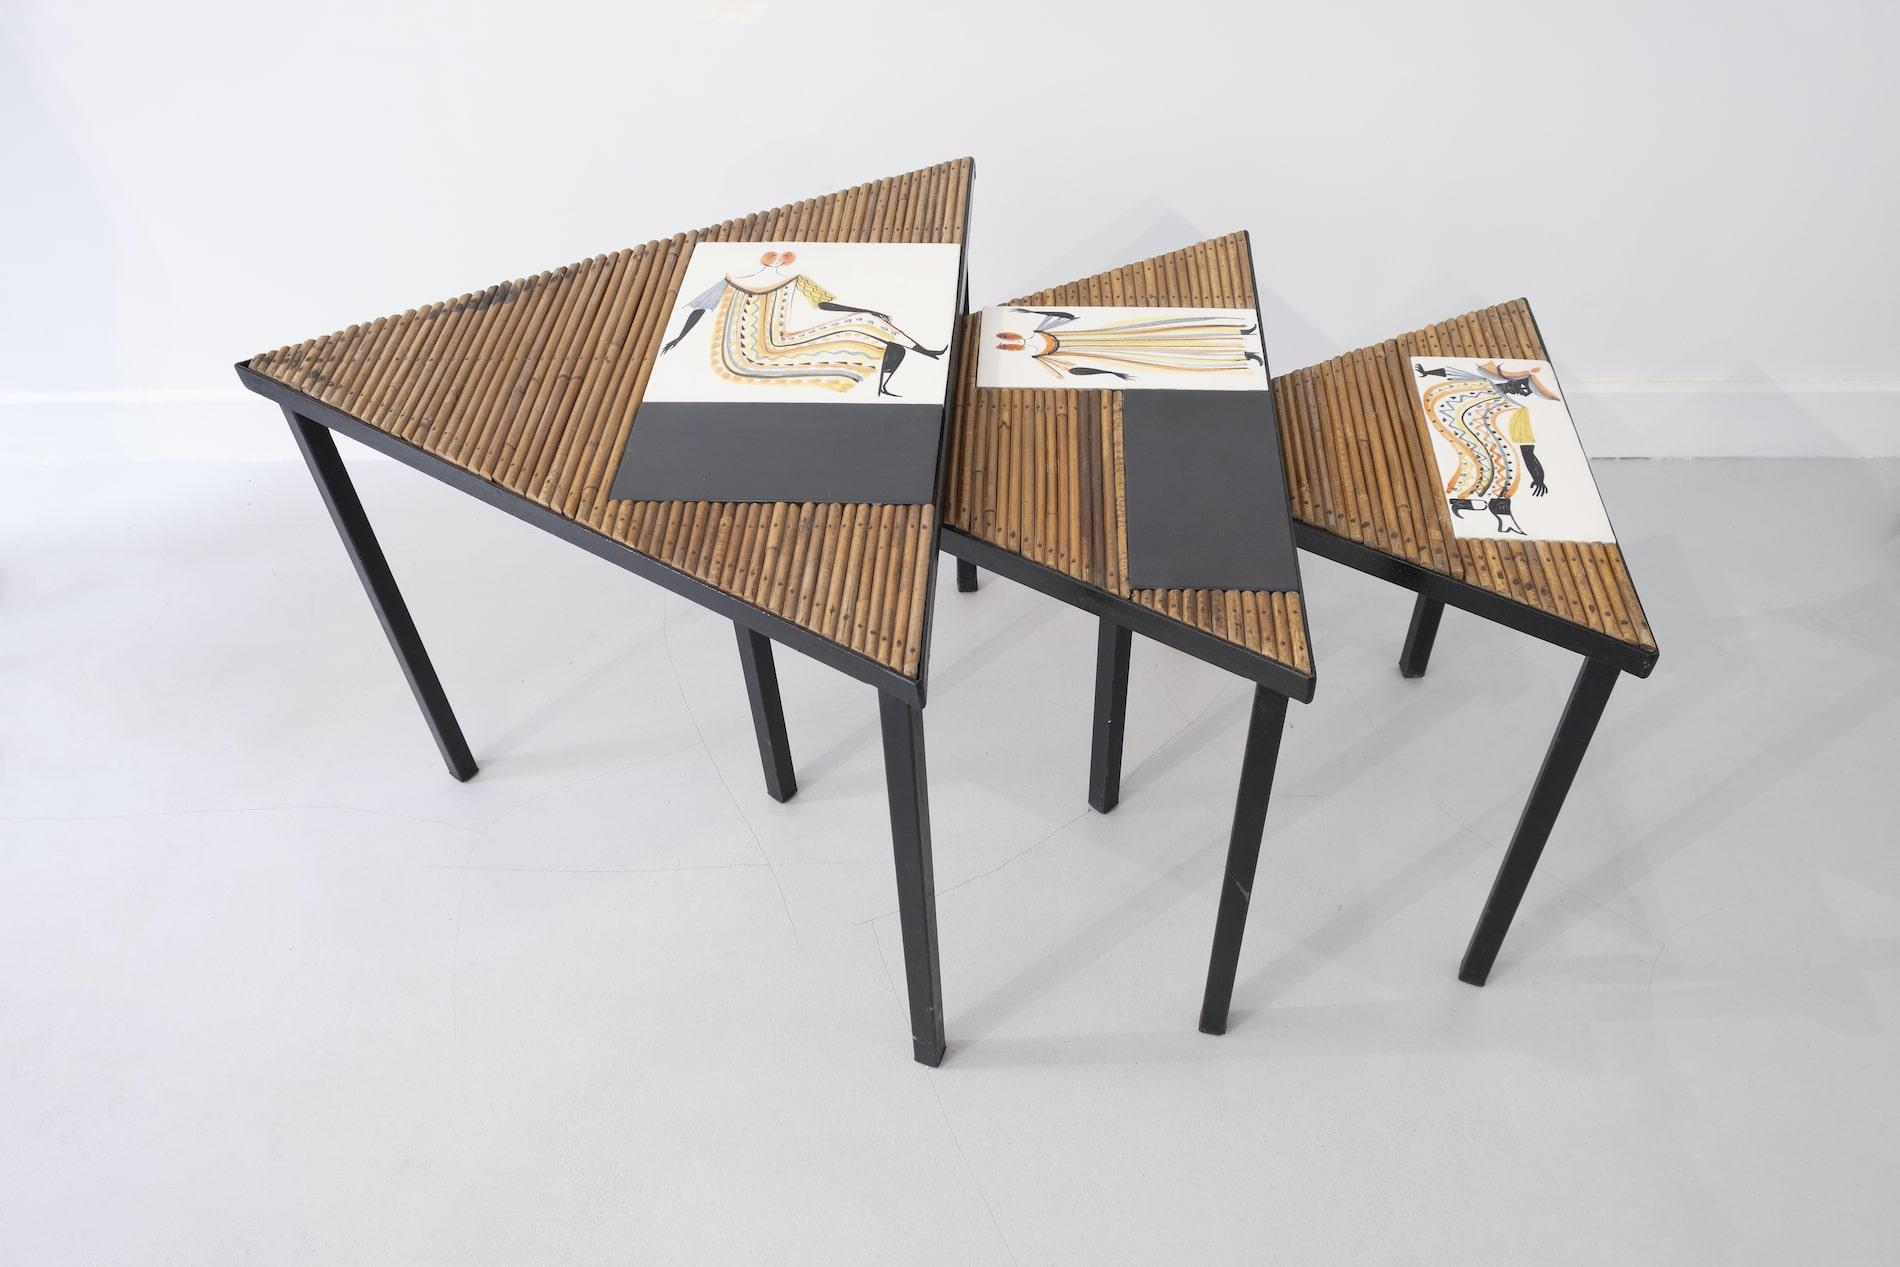 Roger Capron and Audoux-Minet

Rare serie of nesting tables of triangle shapes with tops mixing ceramic tiles and bamboo rods; black painted steel frames

Vallauris, France,  circa 1960
Collectible piece.

The large one :
Length x width : 23.6 x